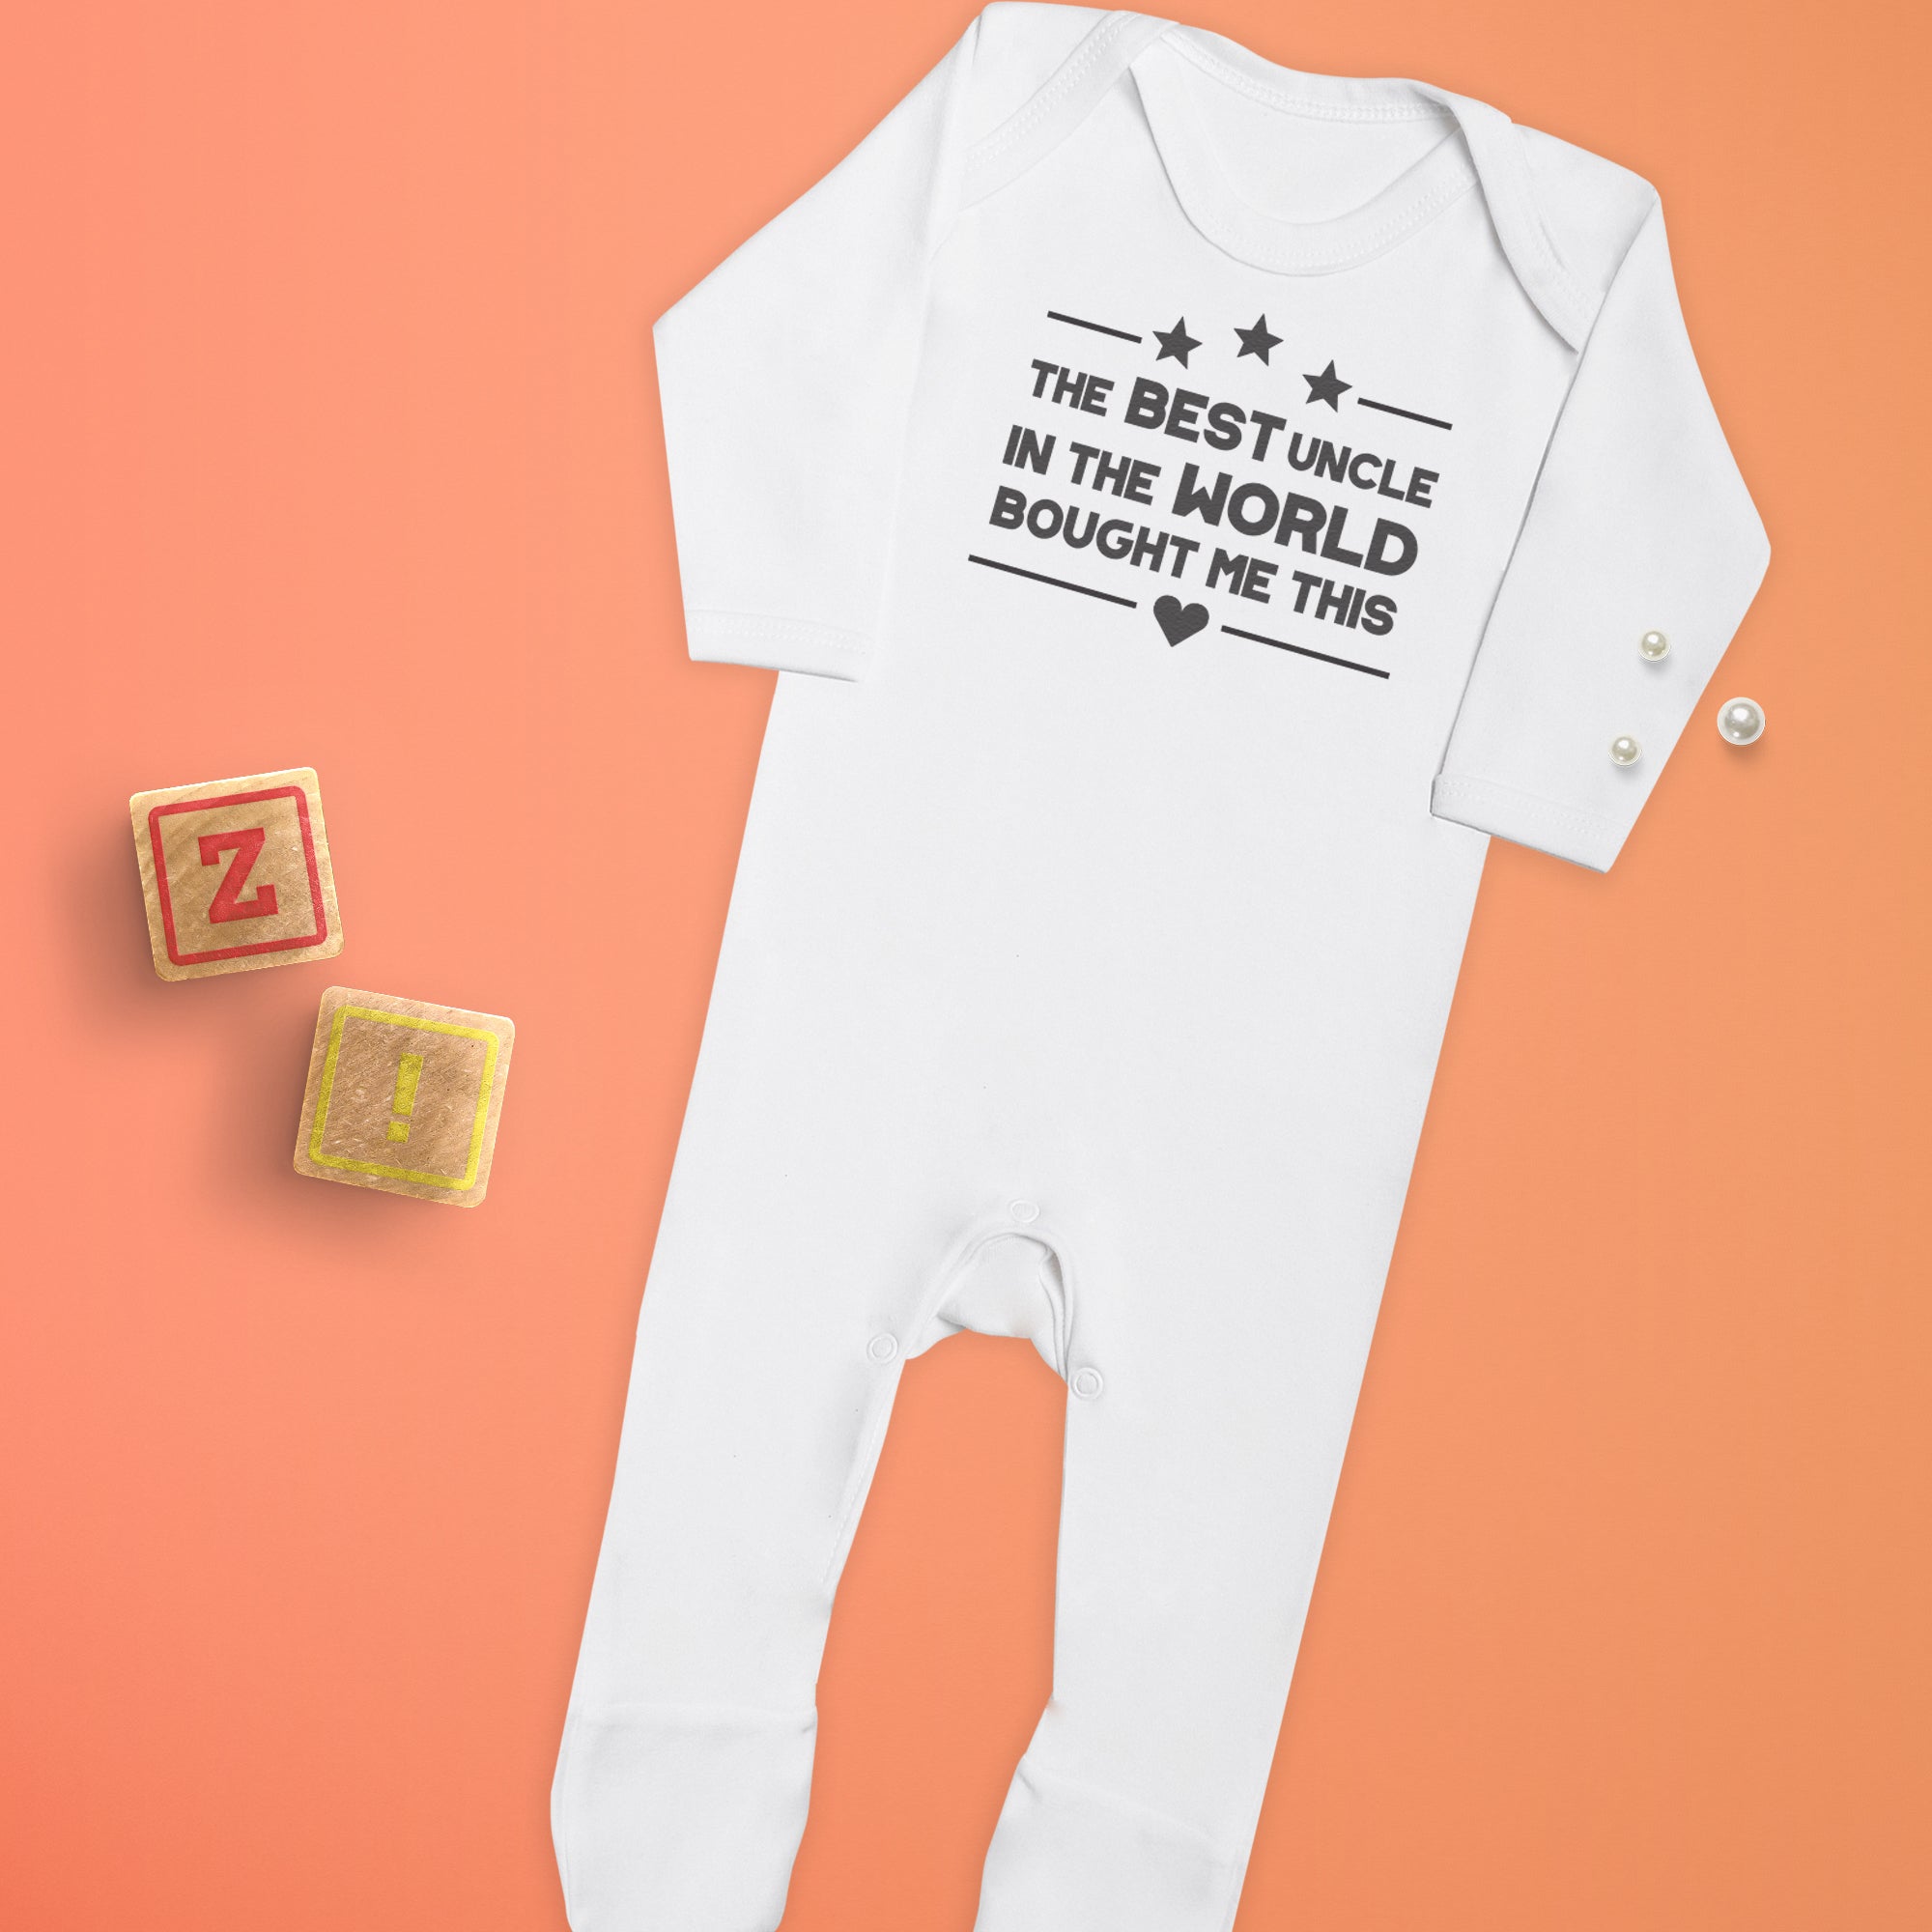 Pick A Family Name - The Best Mummy, Auntie, Grandad and more In The World Brought This - Baby Romper